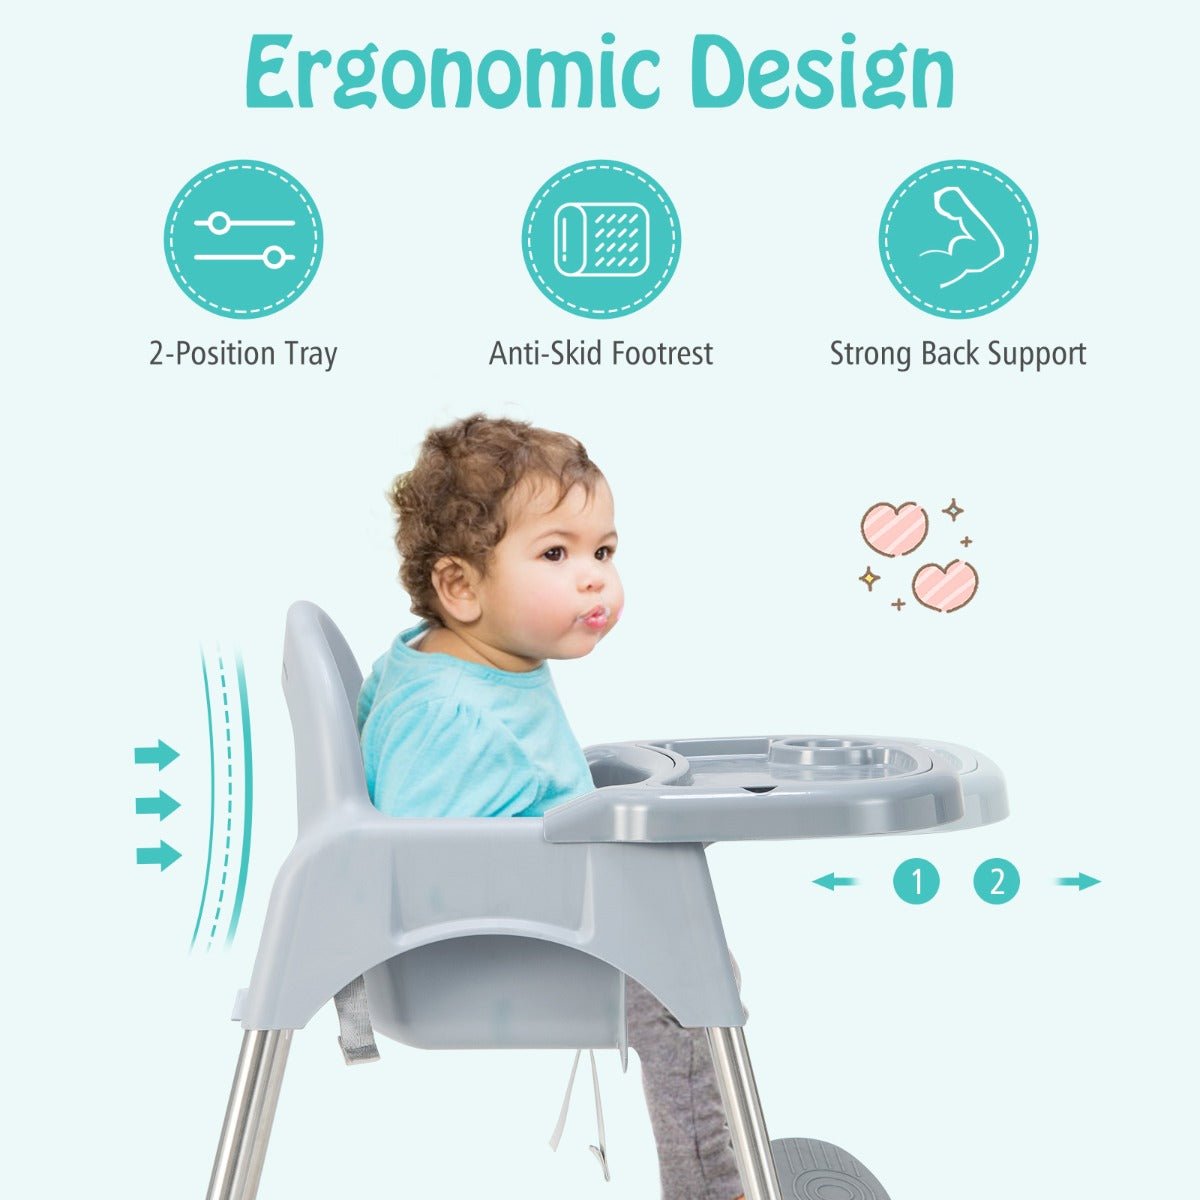 Experience Joyful Meals with the Grey 4-in-1 High Chair